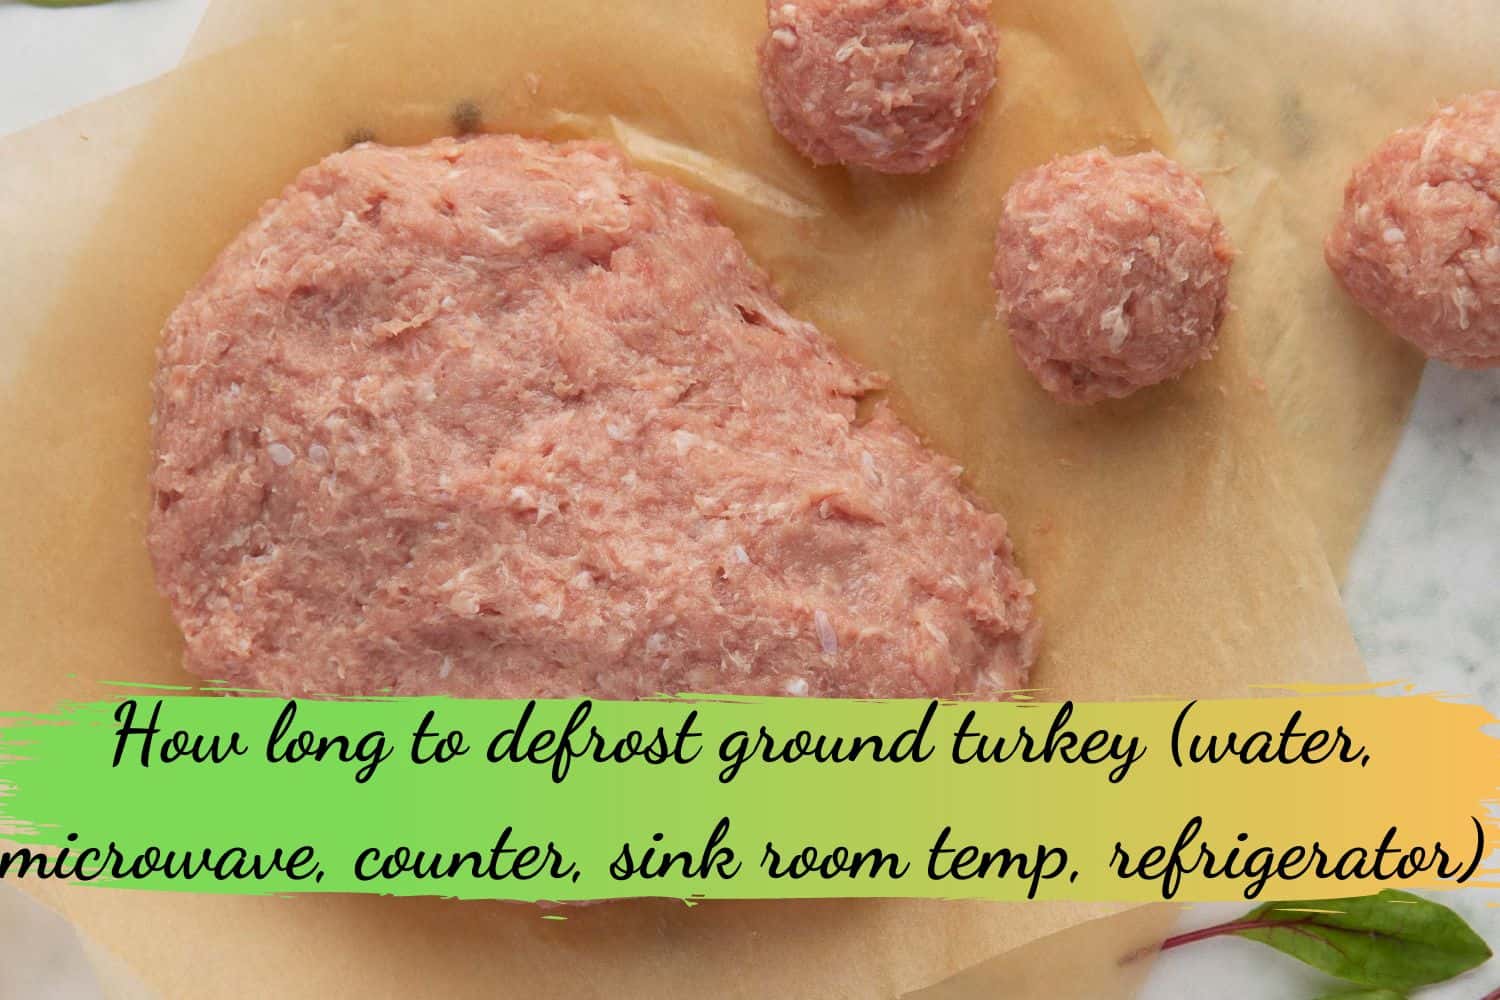 How long to defrost ground turkey (water, microwave, counter, sink room temp, refrigerator)